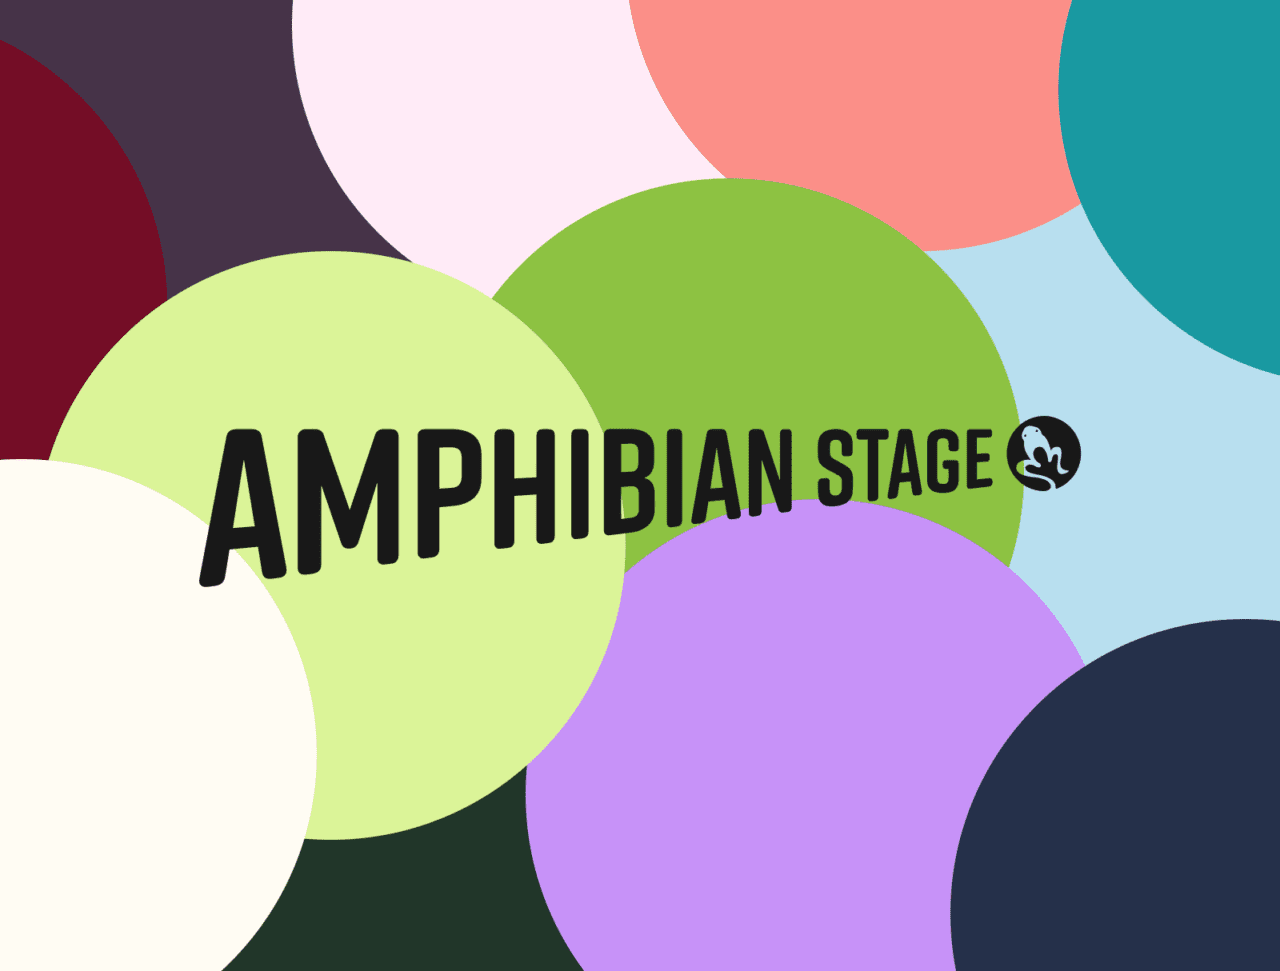 Black Amphibian Stage logo on a background made of circles in the colours of the brand palette